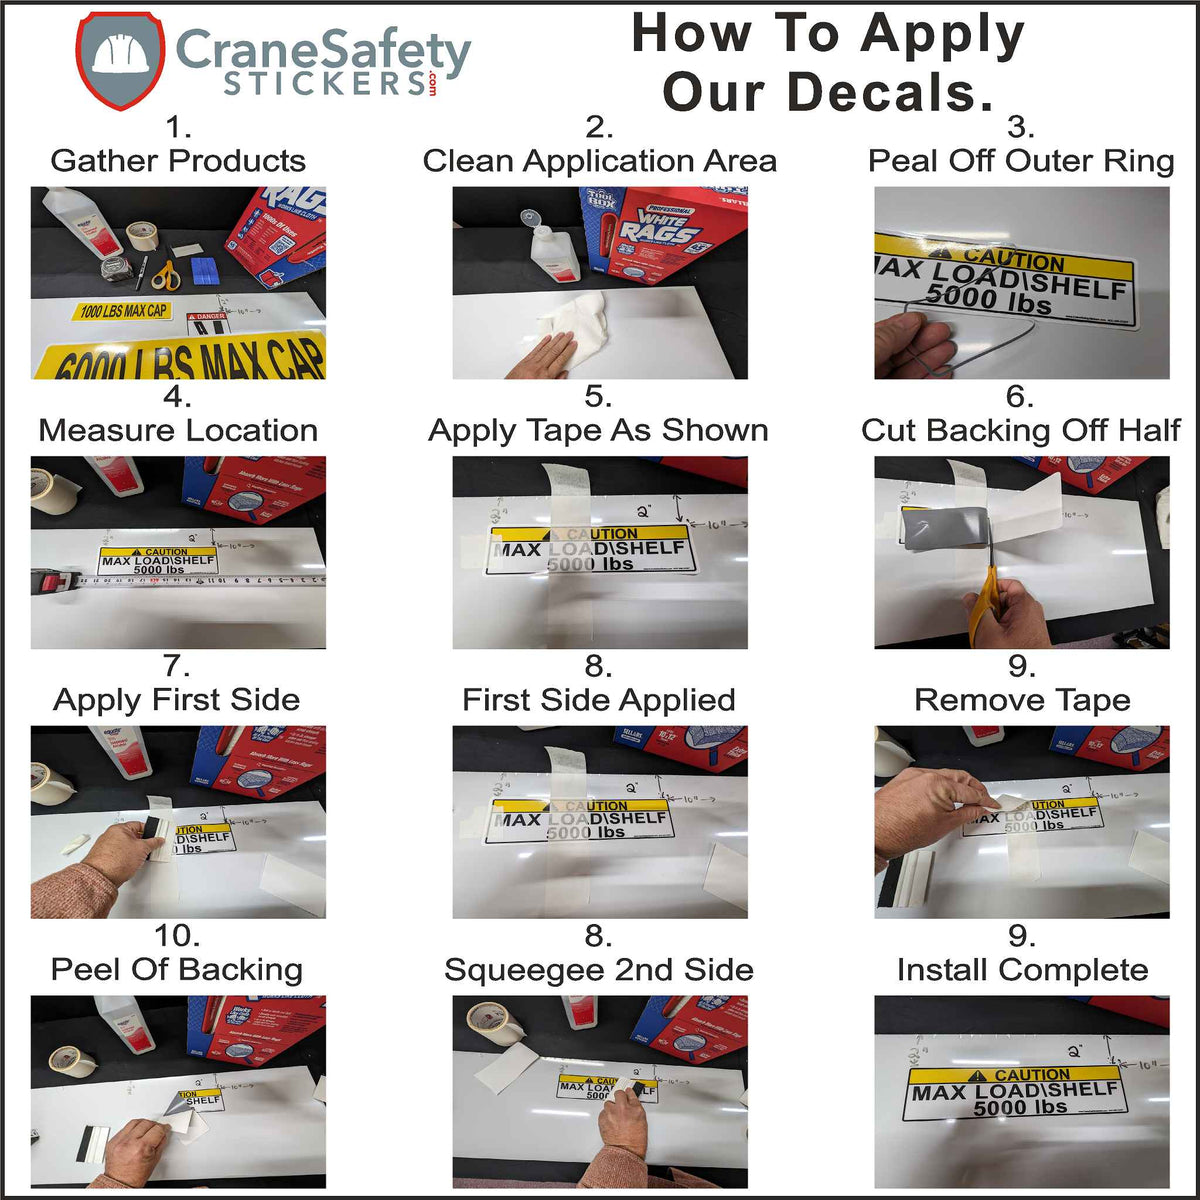 How to Install our OSHA Crane Safety Decal Crush Hazard. Never stand near or on tracks without operators knowledge. rotating crane and tracks can cause sever injury or death.